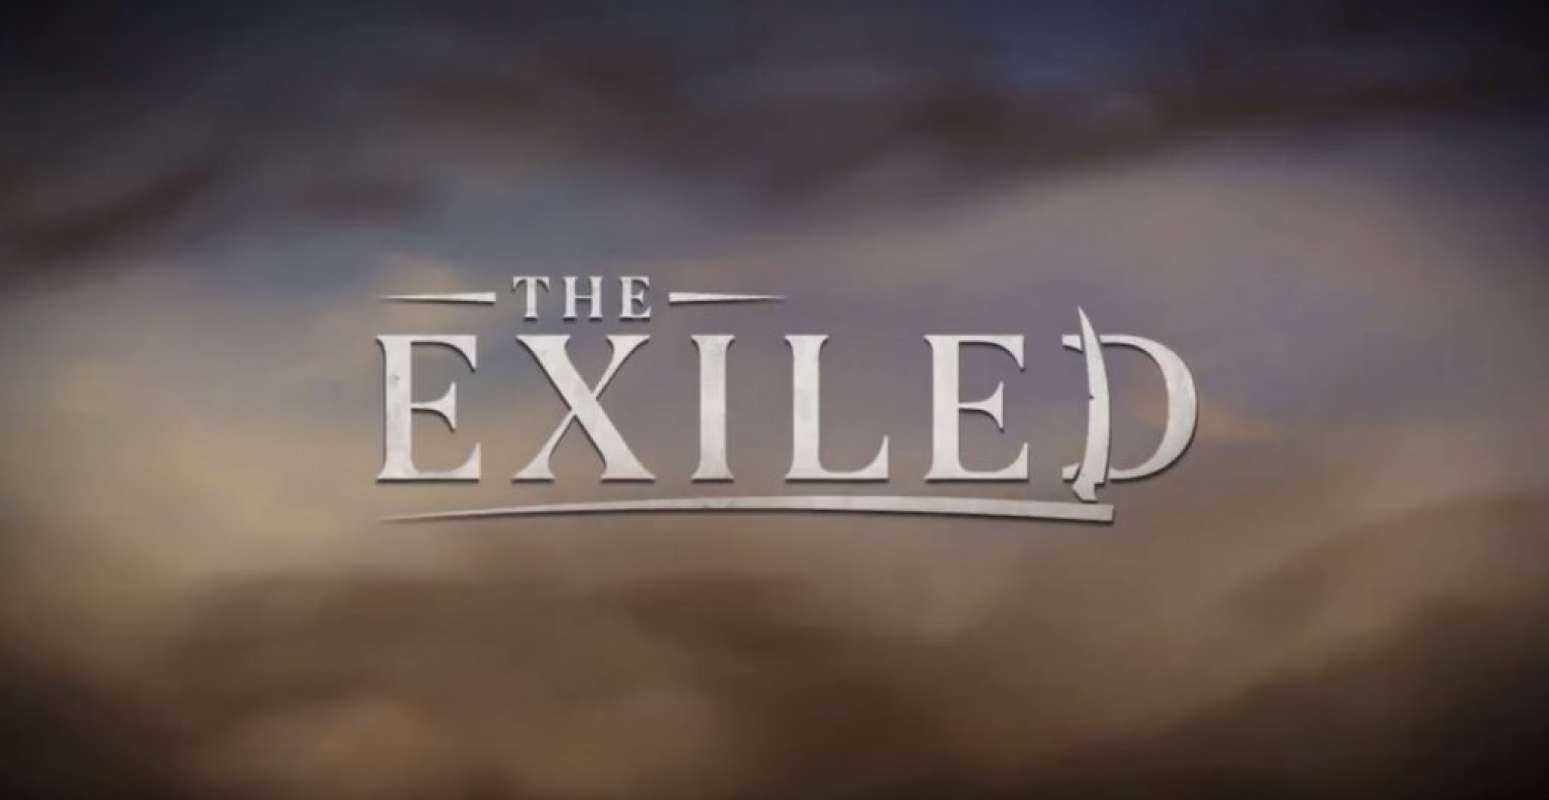 The Exiled